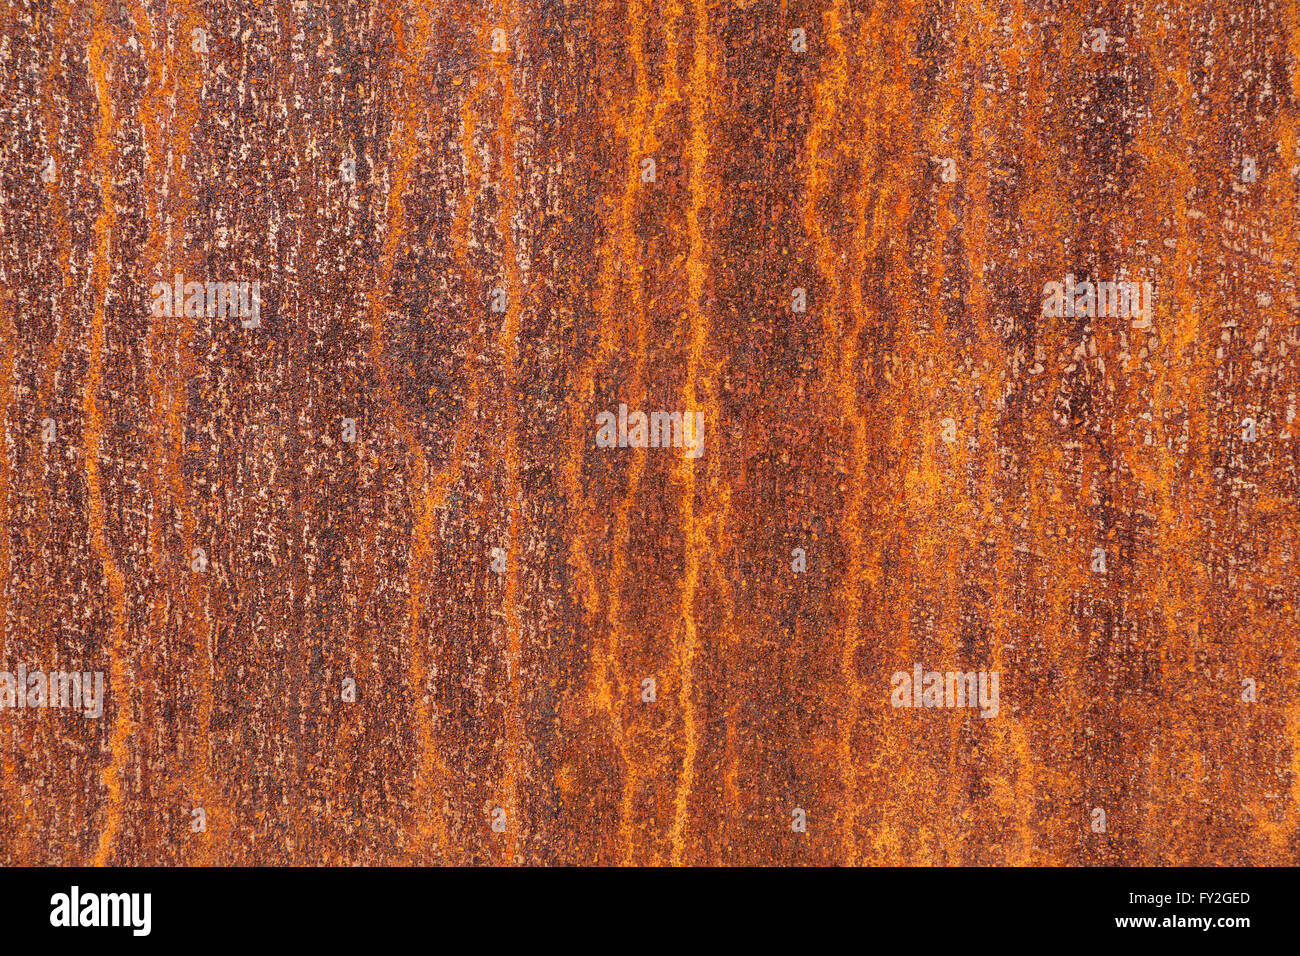 https://c8.alamy.com/comp/FY2GED/texture-of-a-corroded-metal-plate-FY2GED.jpg